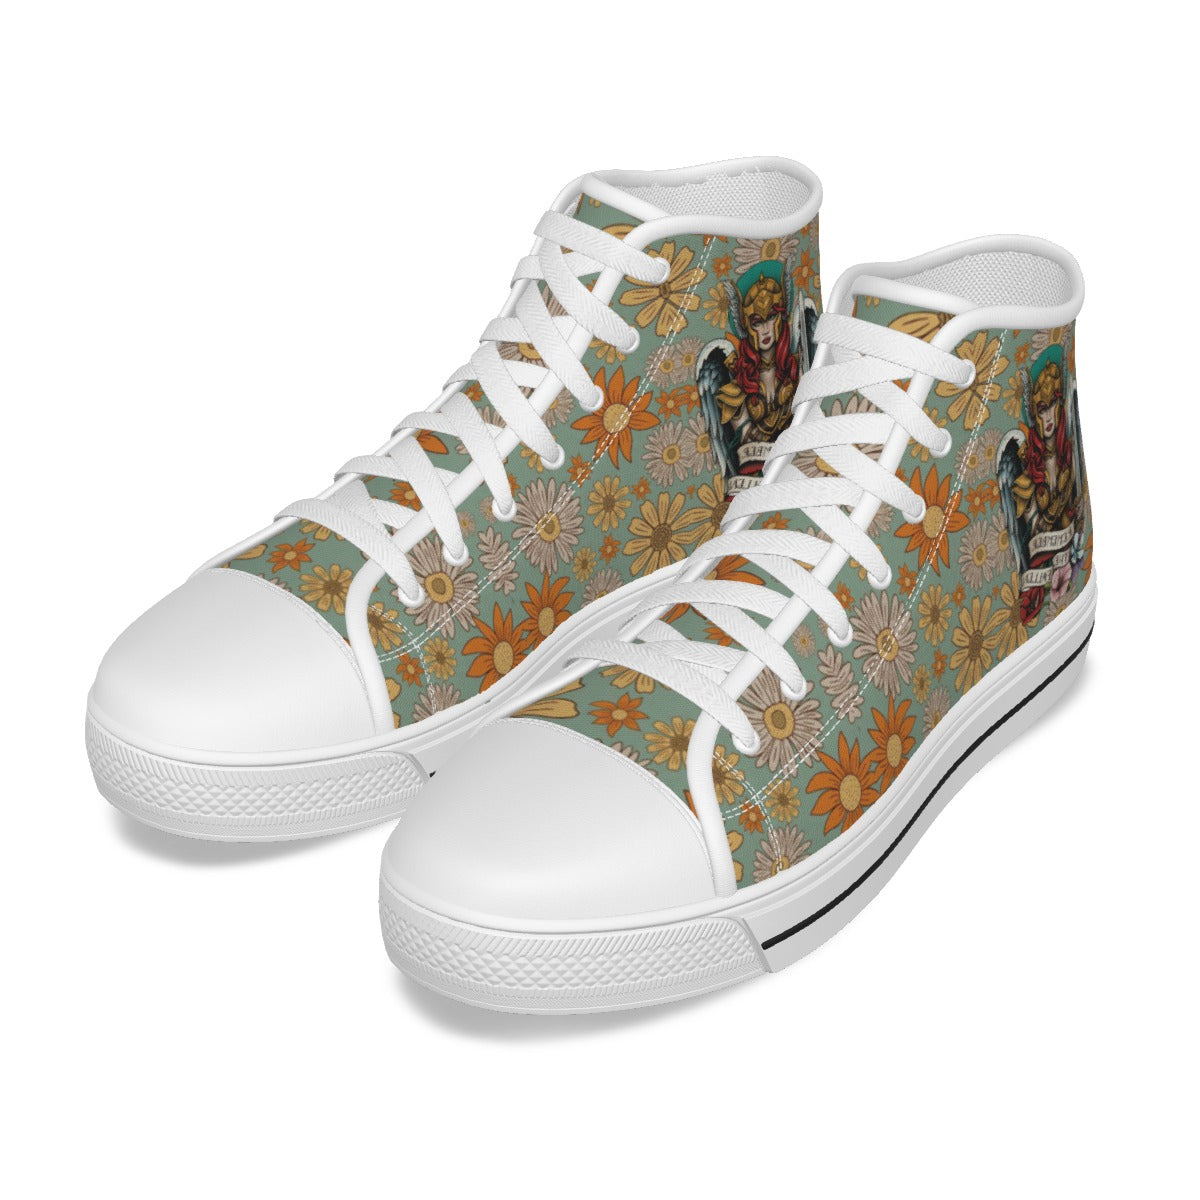 EShoes Personalized Women's Canvas Shoes, Remember The Fallen Shoes, Custom Name Shoes.